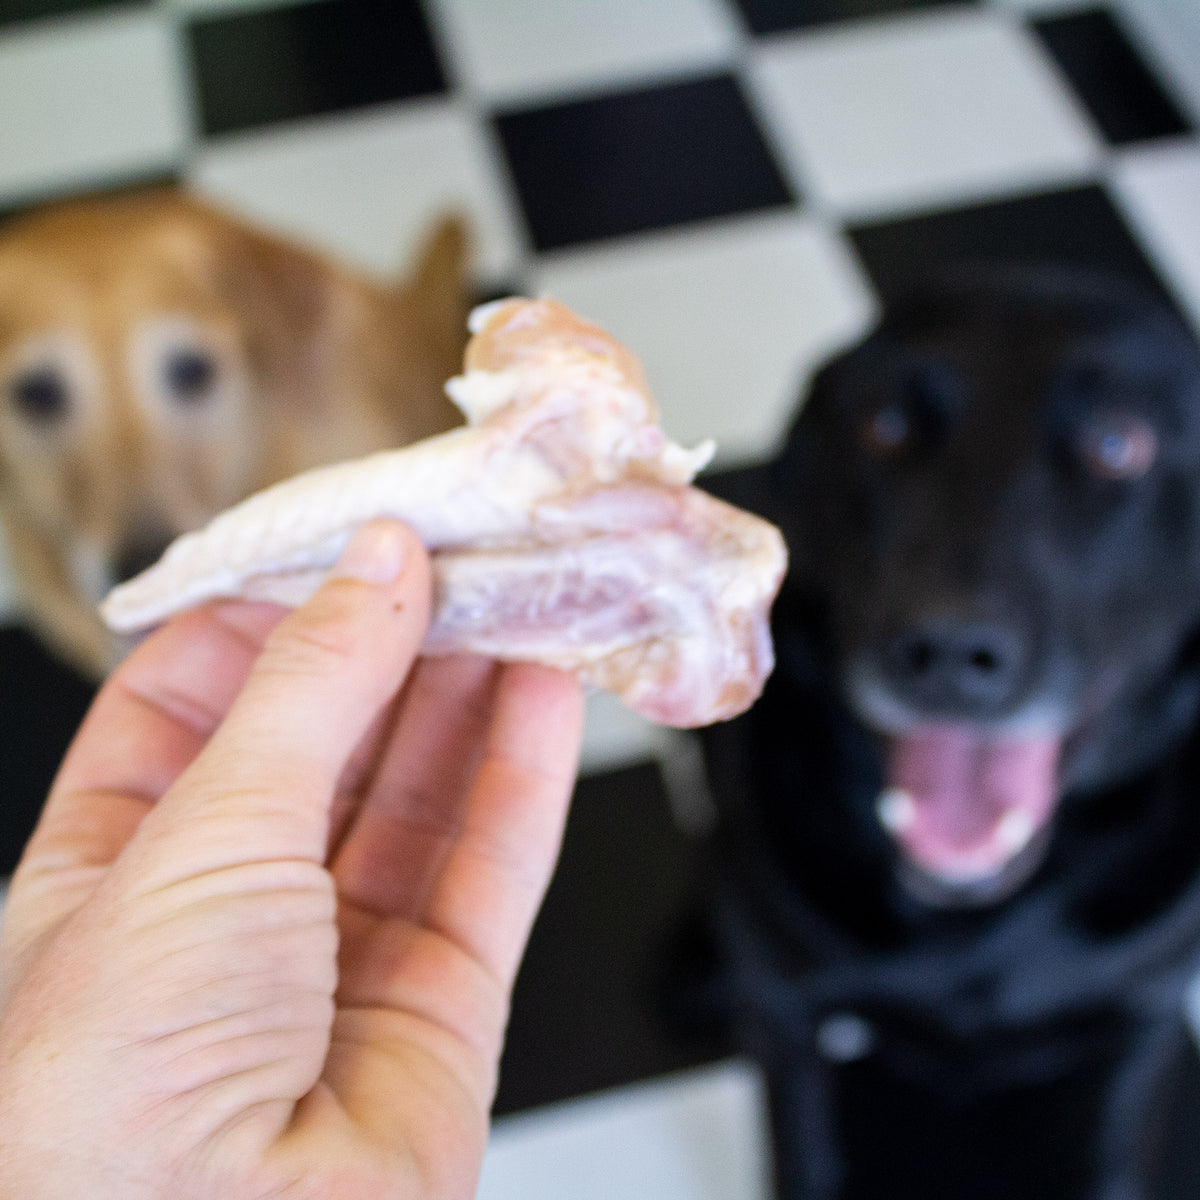 dog swallowed whole chicken wing